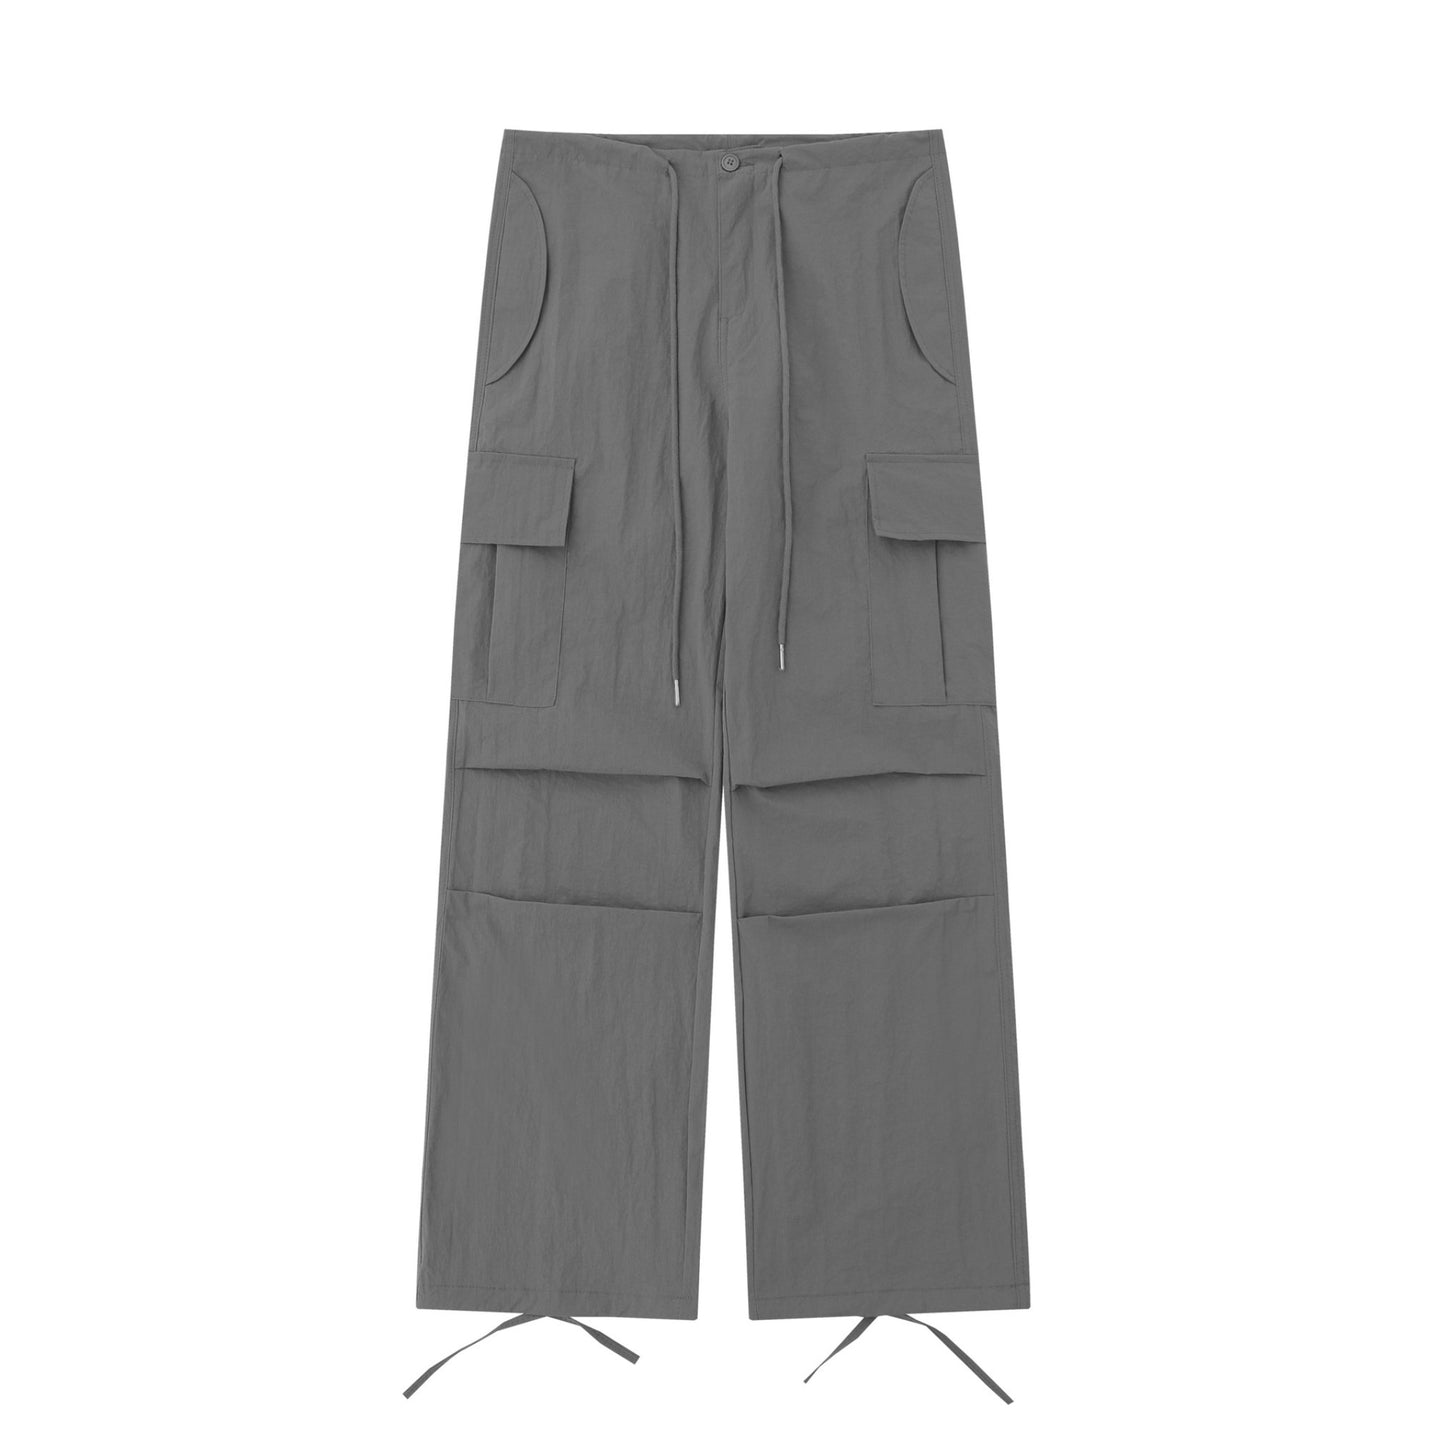 Unisex 2 Colors Black and Gray Pleated Loose Straight-leg Cargo Pants